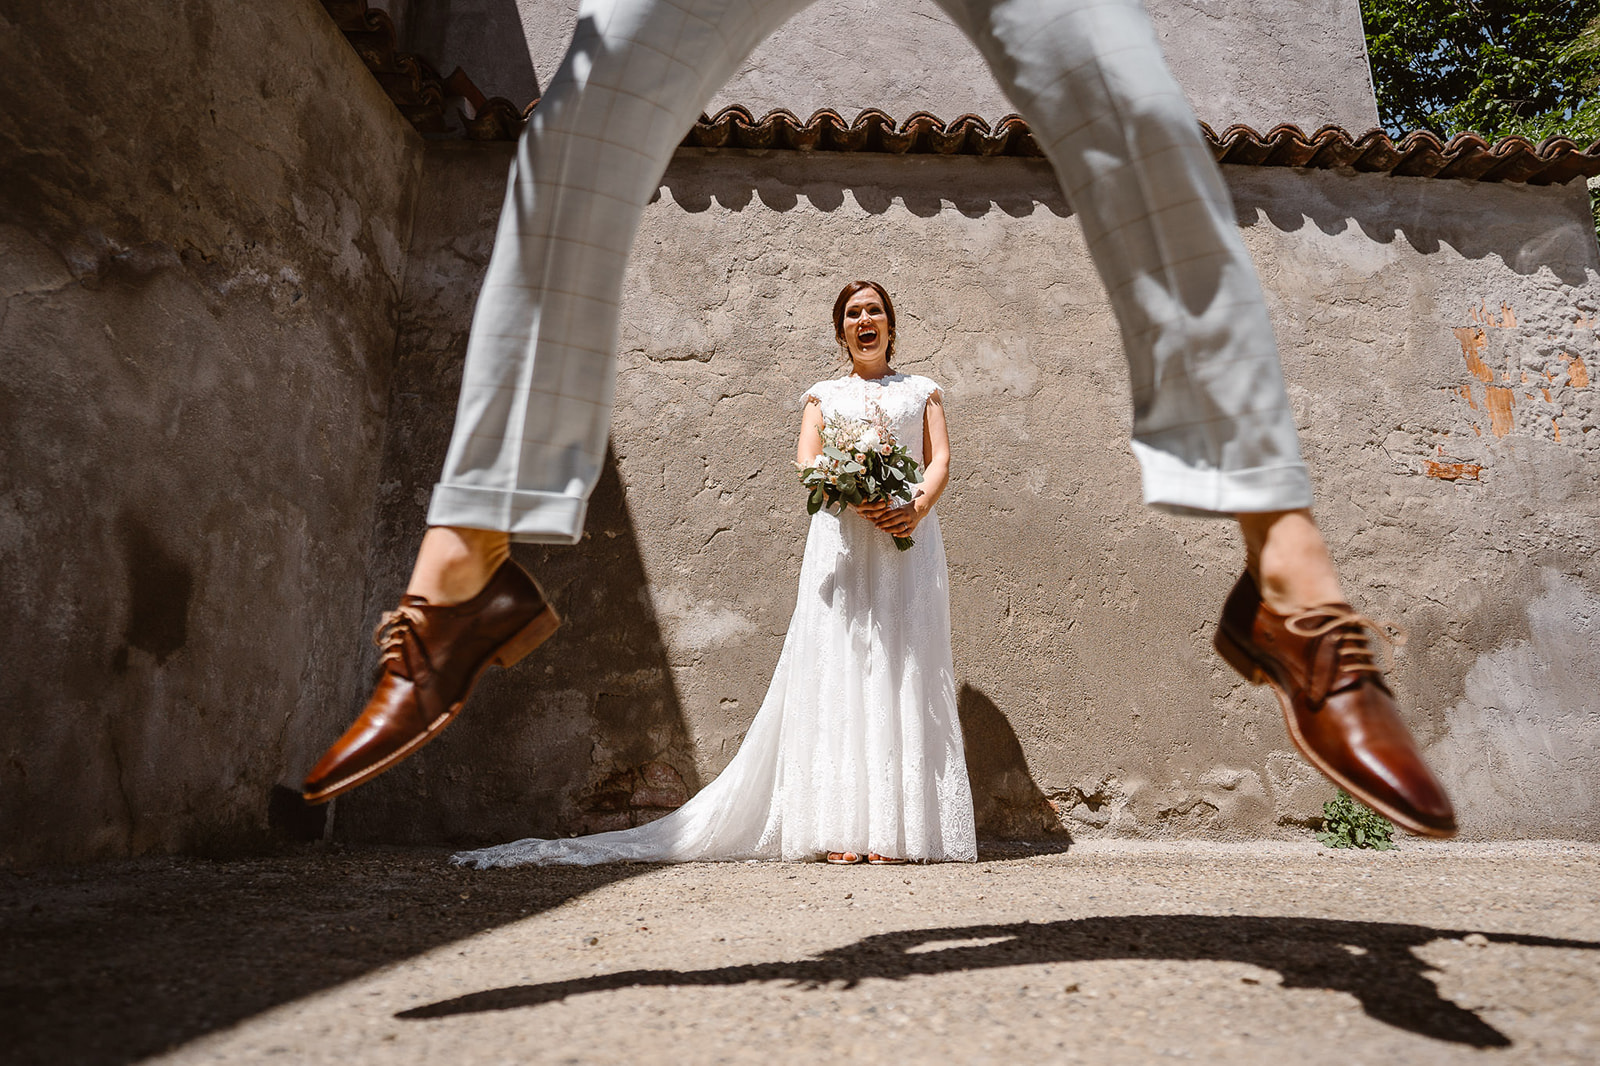 A fun photo of the groom jumping high in front of the bride, with only his shoes visible